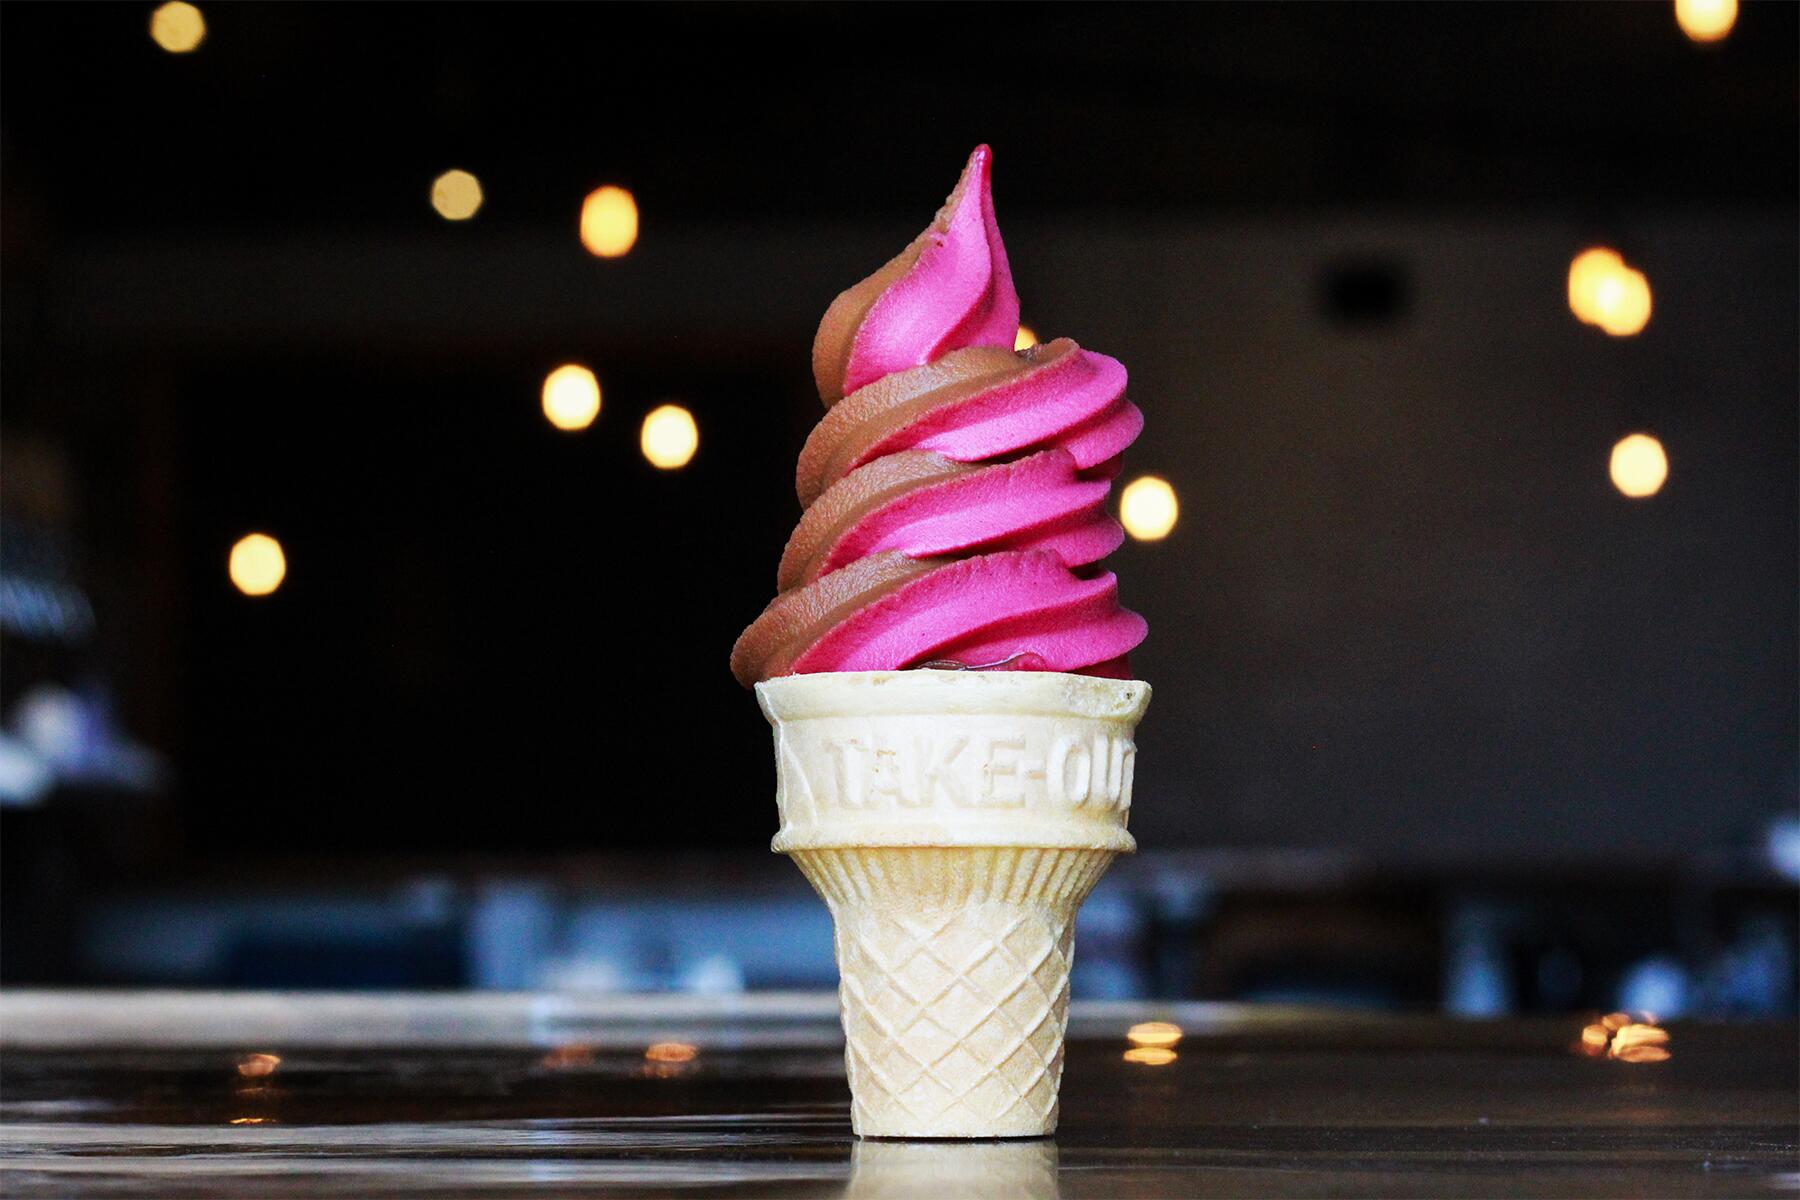 16 Unique Ice Cream Flavors To Try This Summer